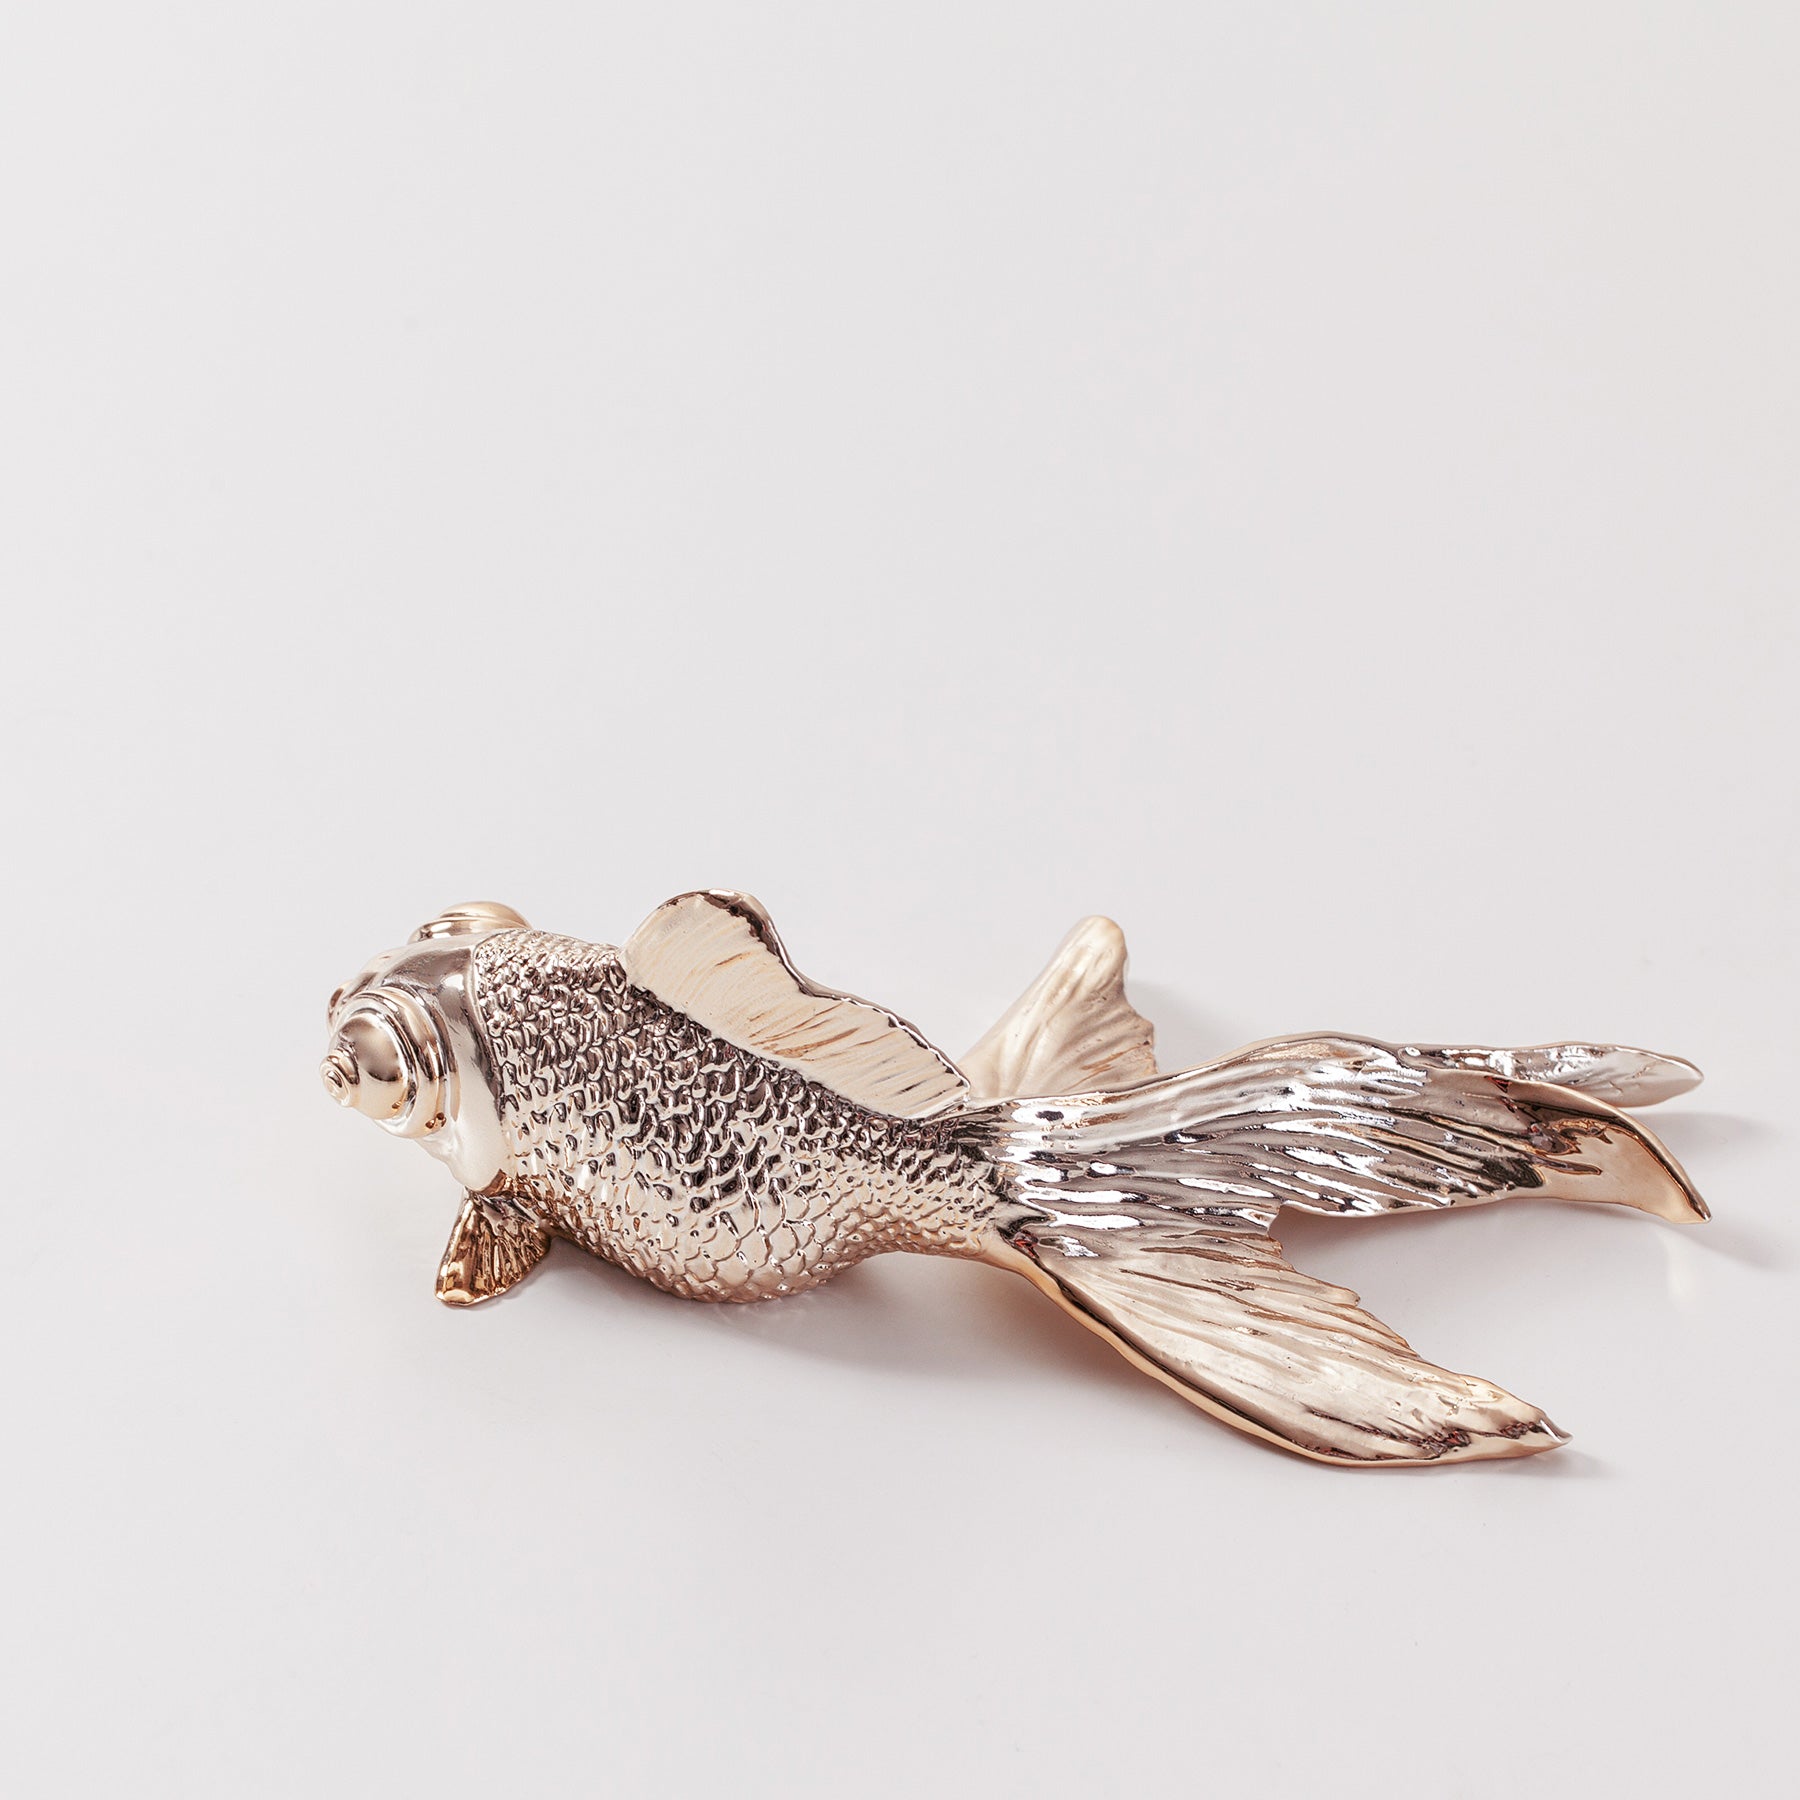 Goldfish Sculpture and Statue by Haoshi Design